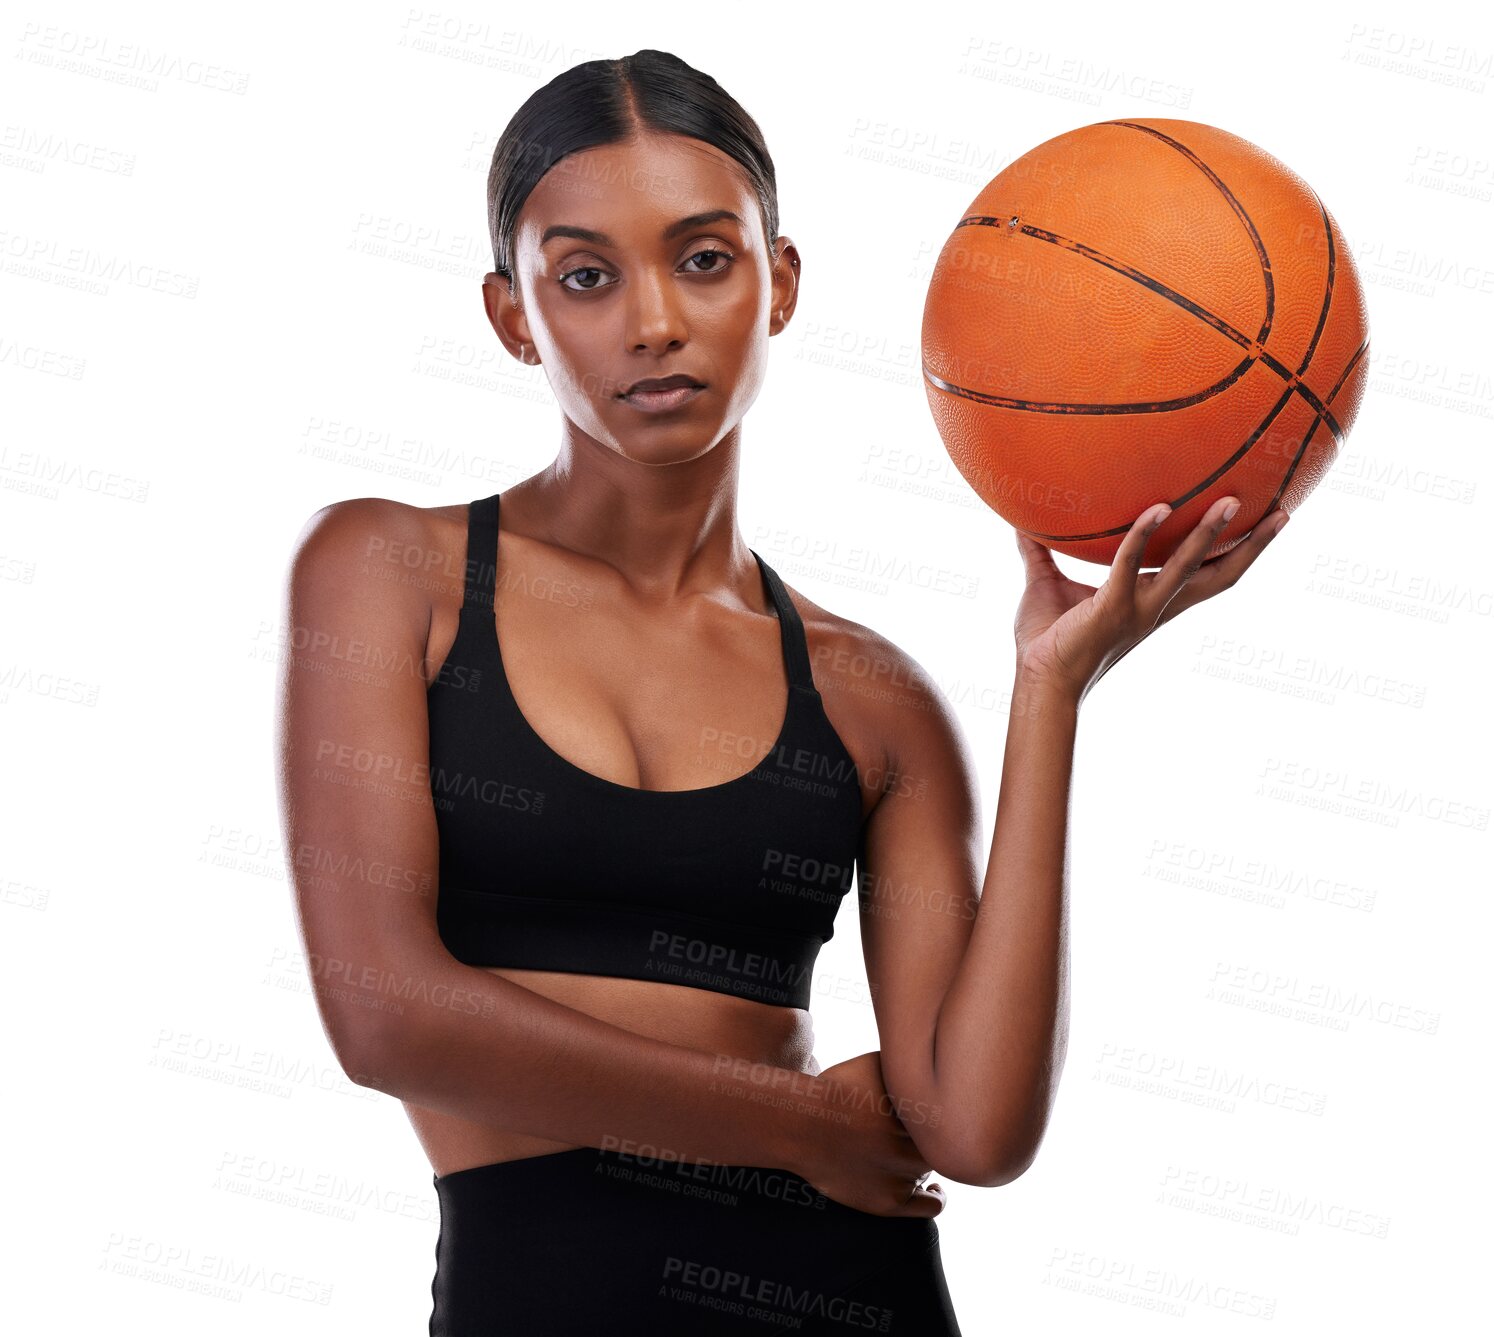 Buy stock photo Fitness, basketball and serious portrait of woman with exercise, game and body training. Performance, workout and sports, girl athlete with ball and confidence isolated on transparent png background.